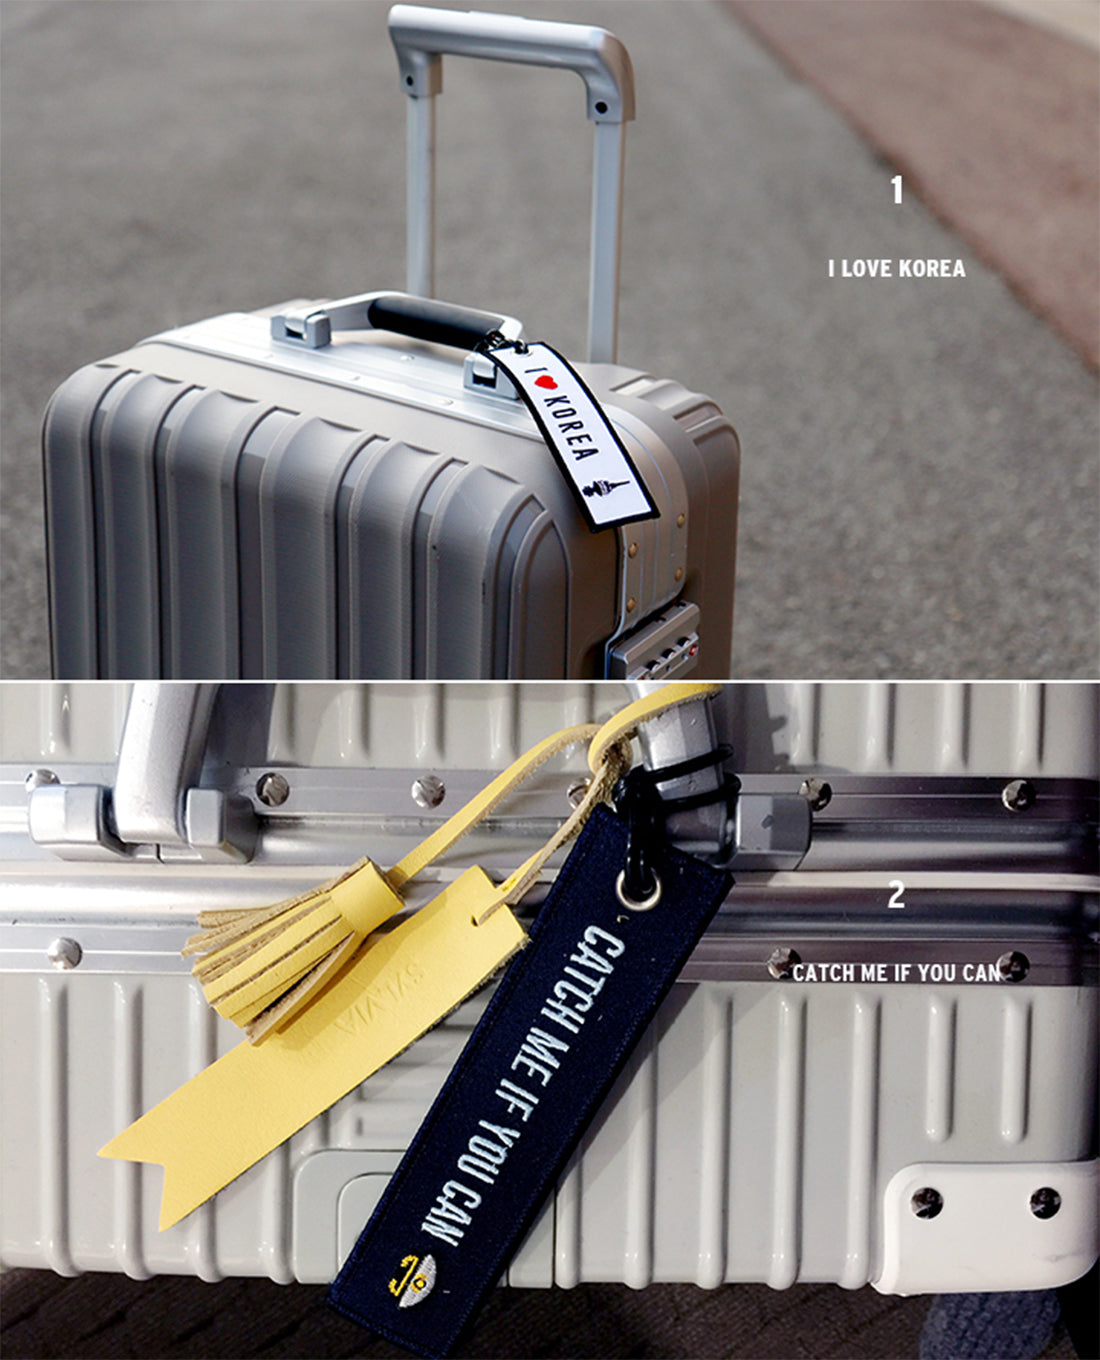 [Lucky Planet] Embroidered Luggage Name Tags - I Love Korea